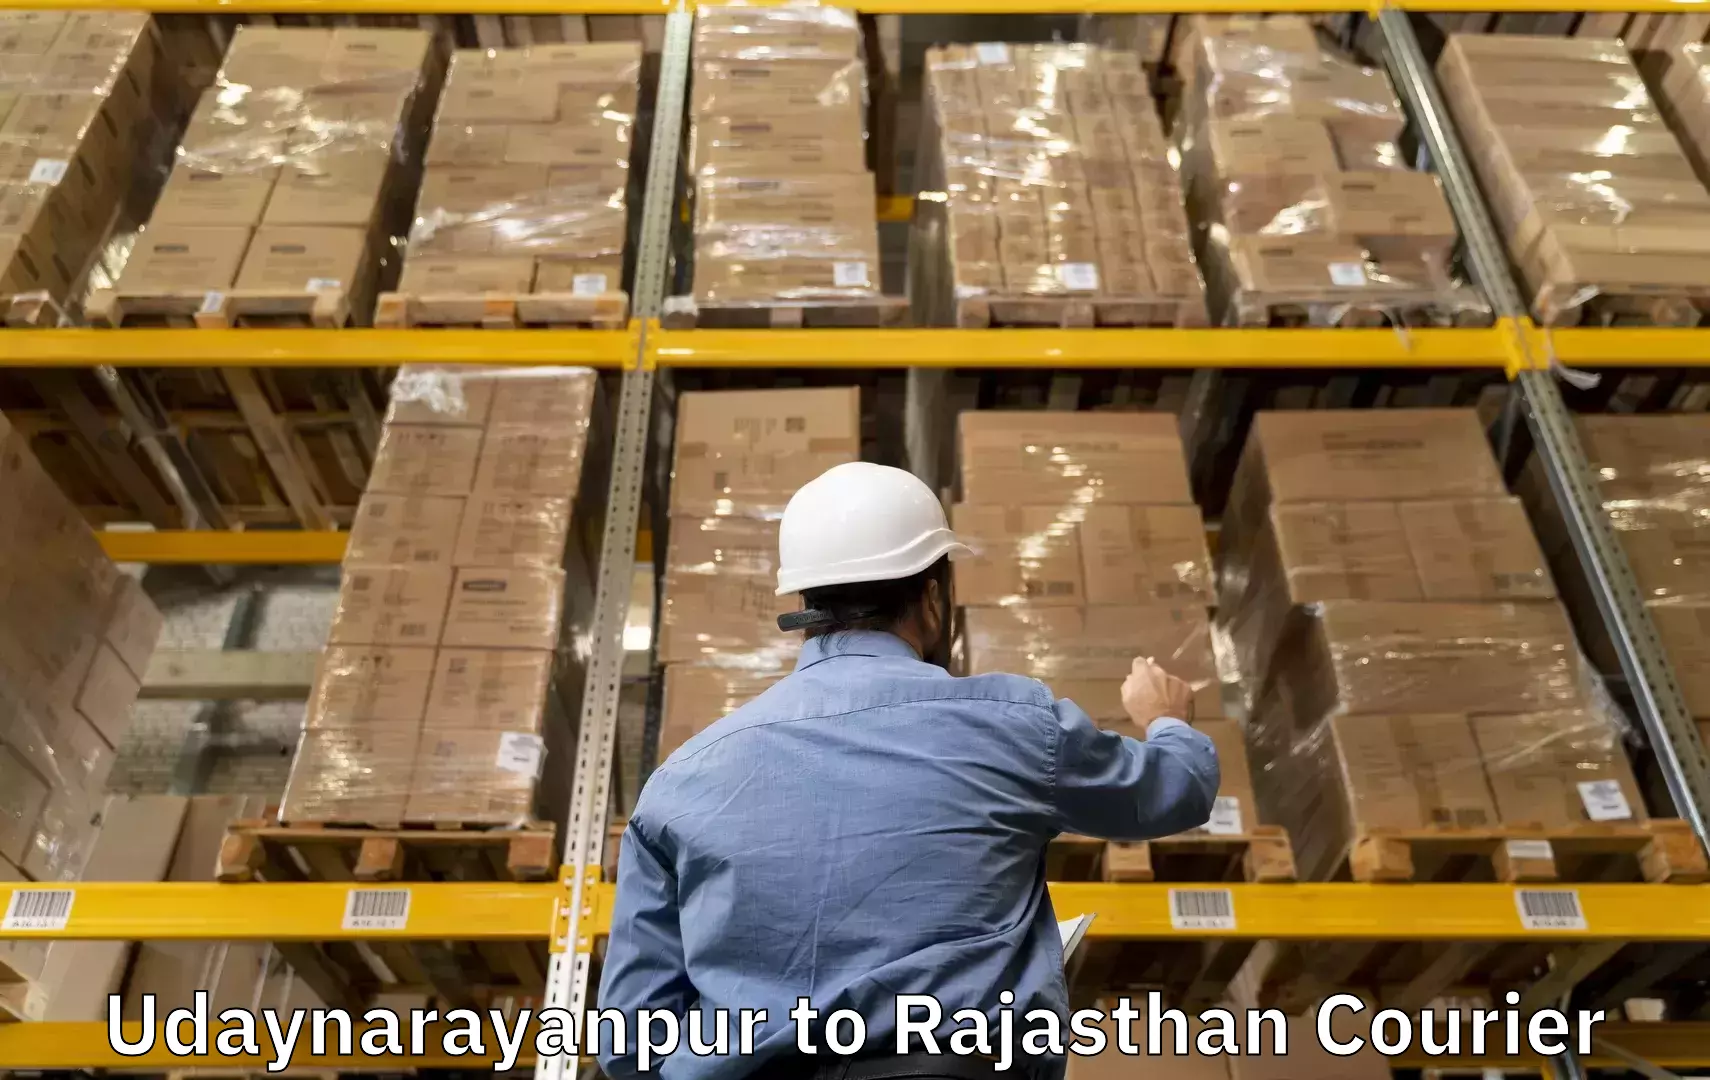 Baggage delivery technology Udaynarayanpur to Merta